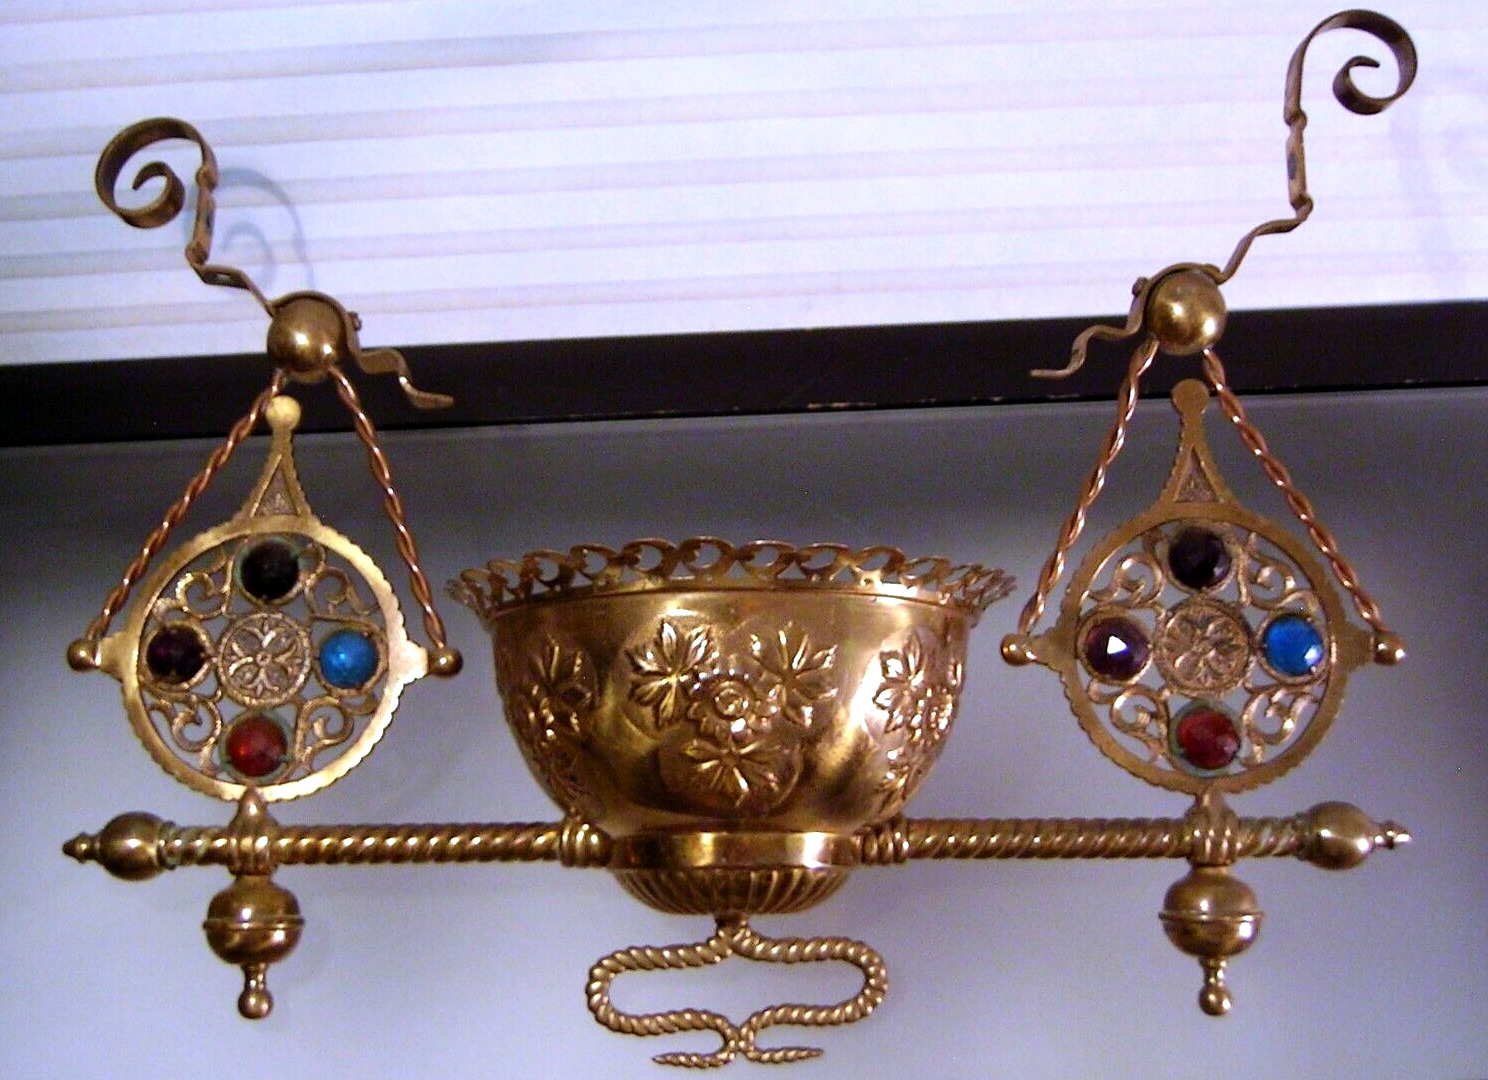 Antique Victorian Gothic Hanging Parlor Oil Lamp Part Ornate Jeweled Brass Frame